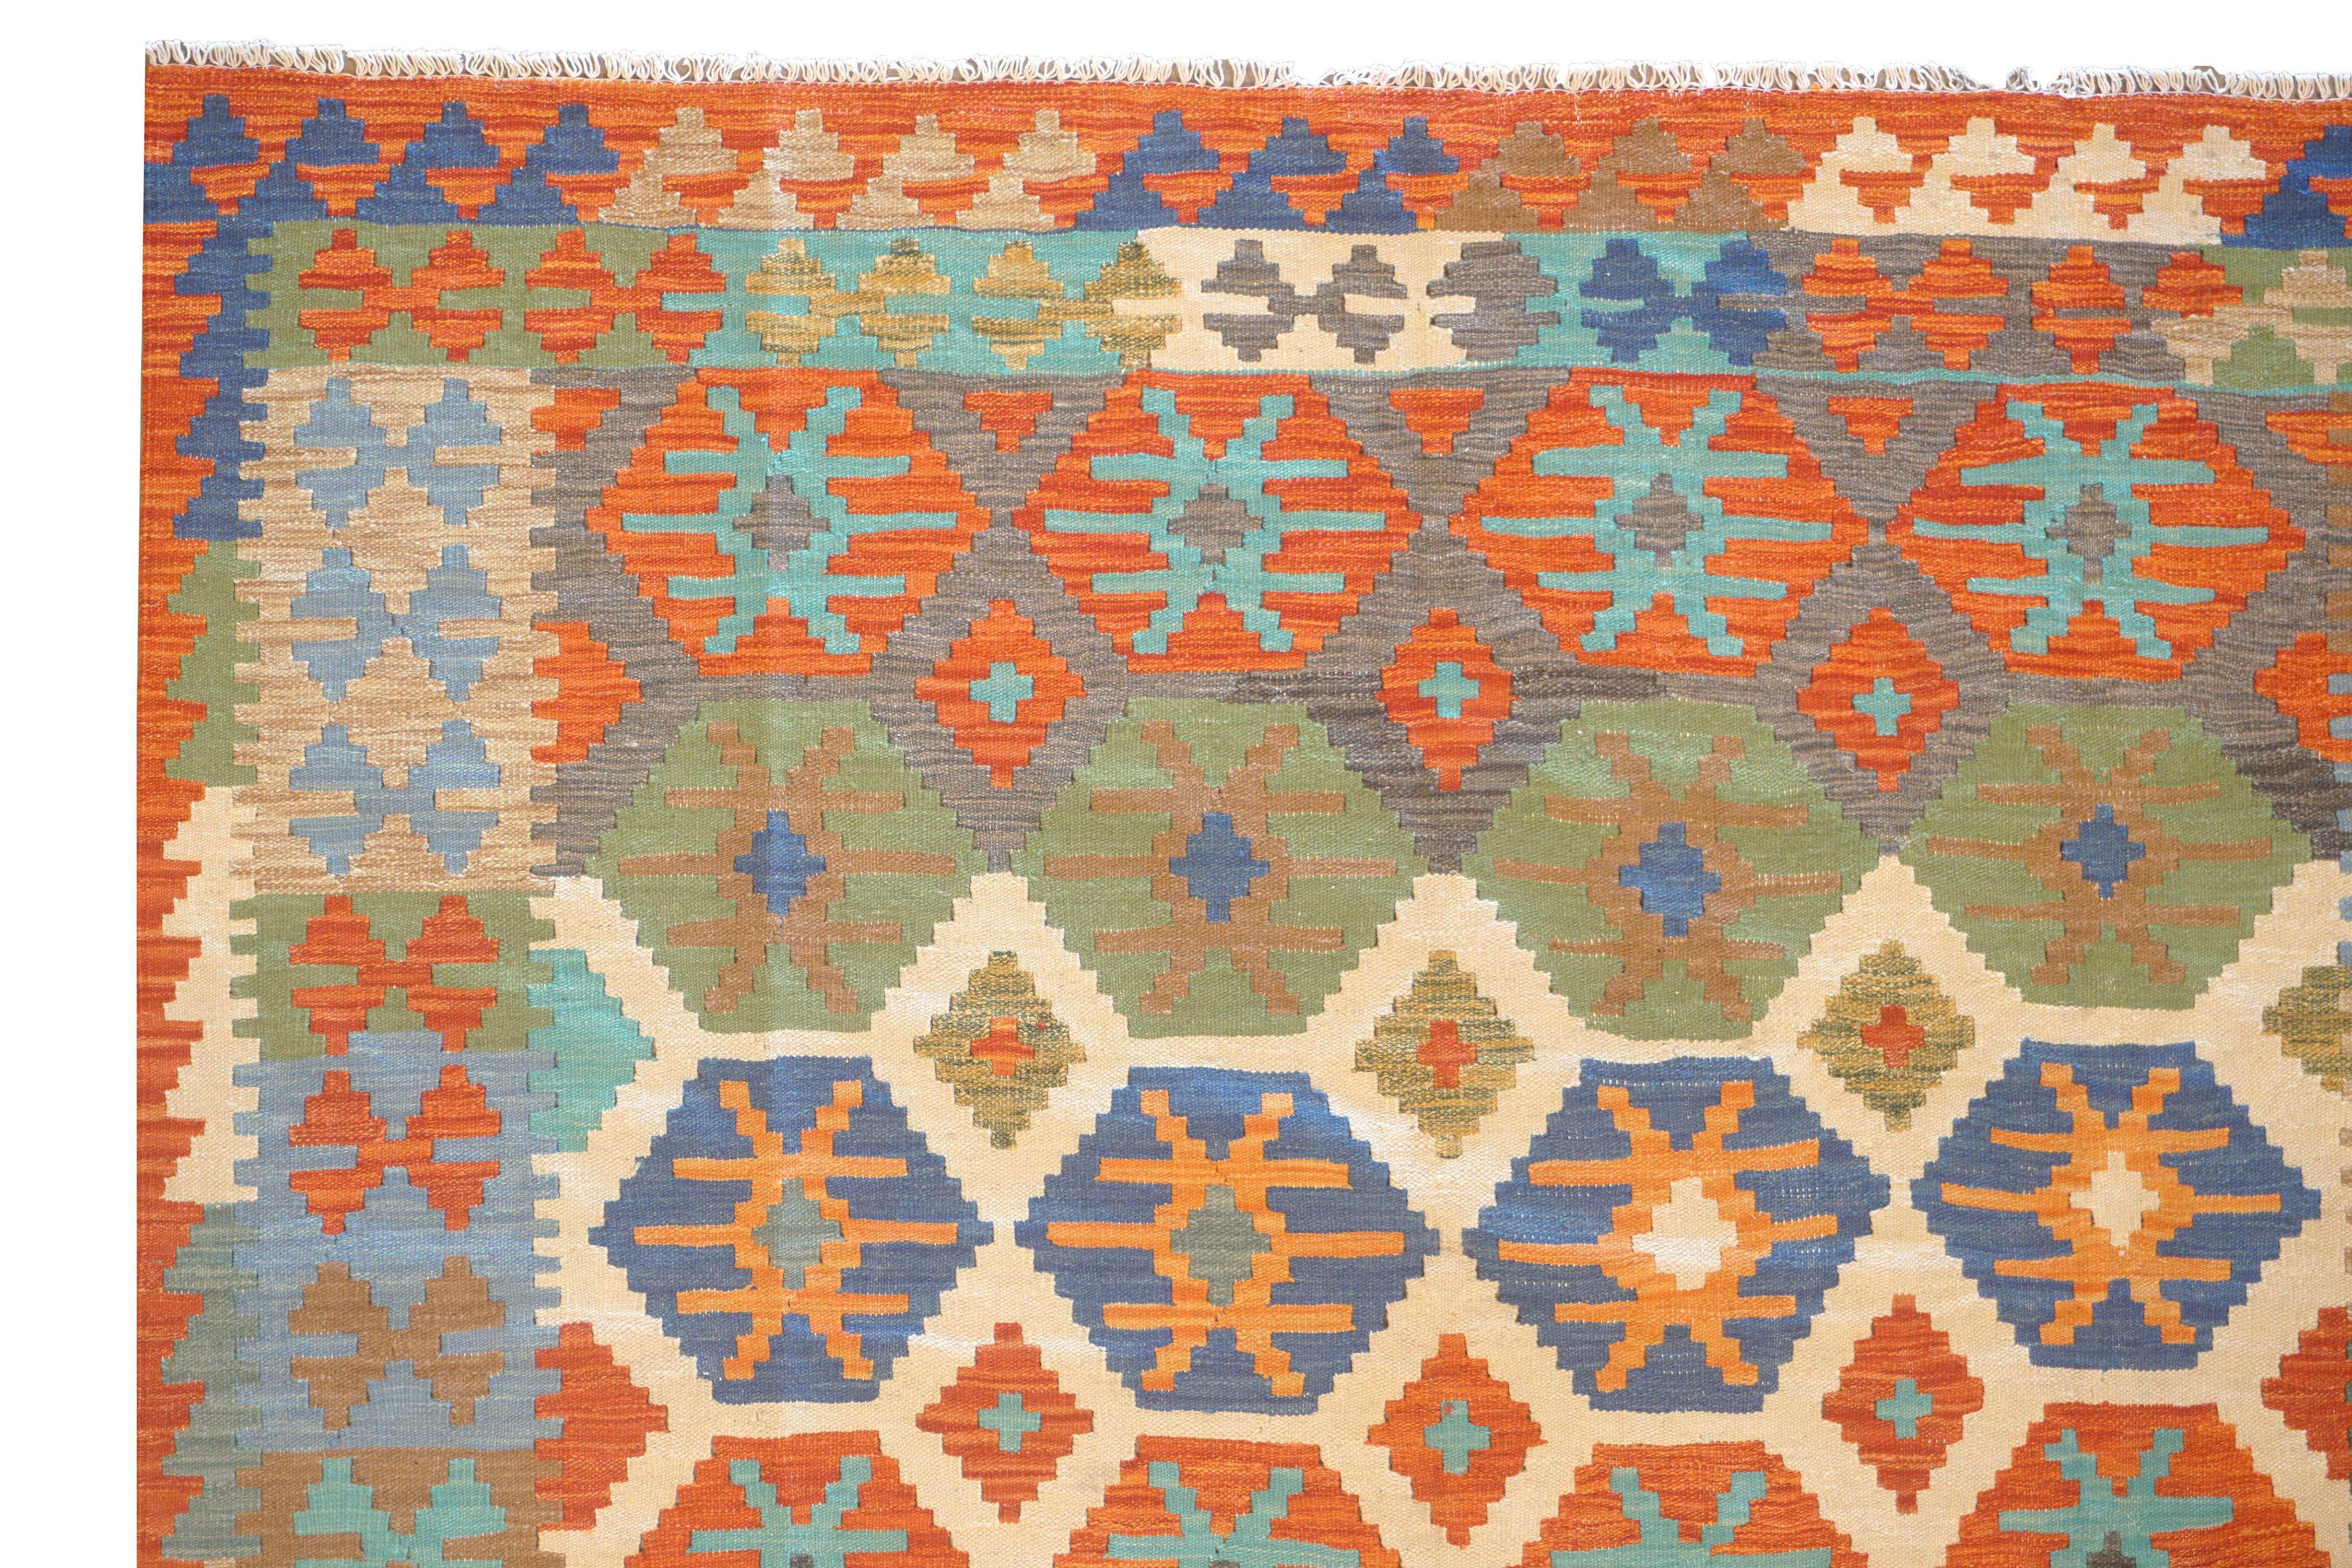 Hand-Woven Multicolored Afghan Kilim For Sale